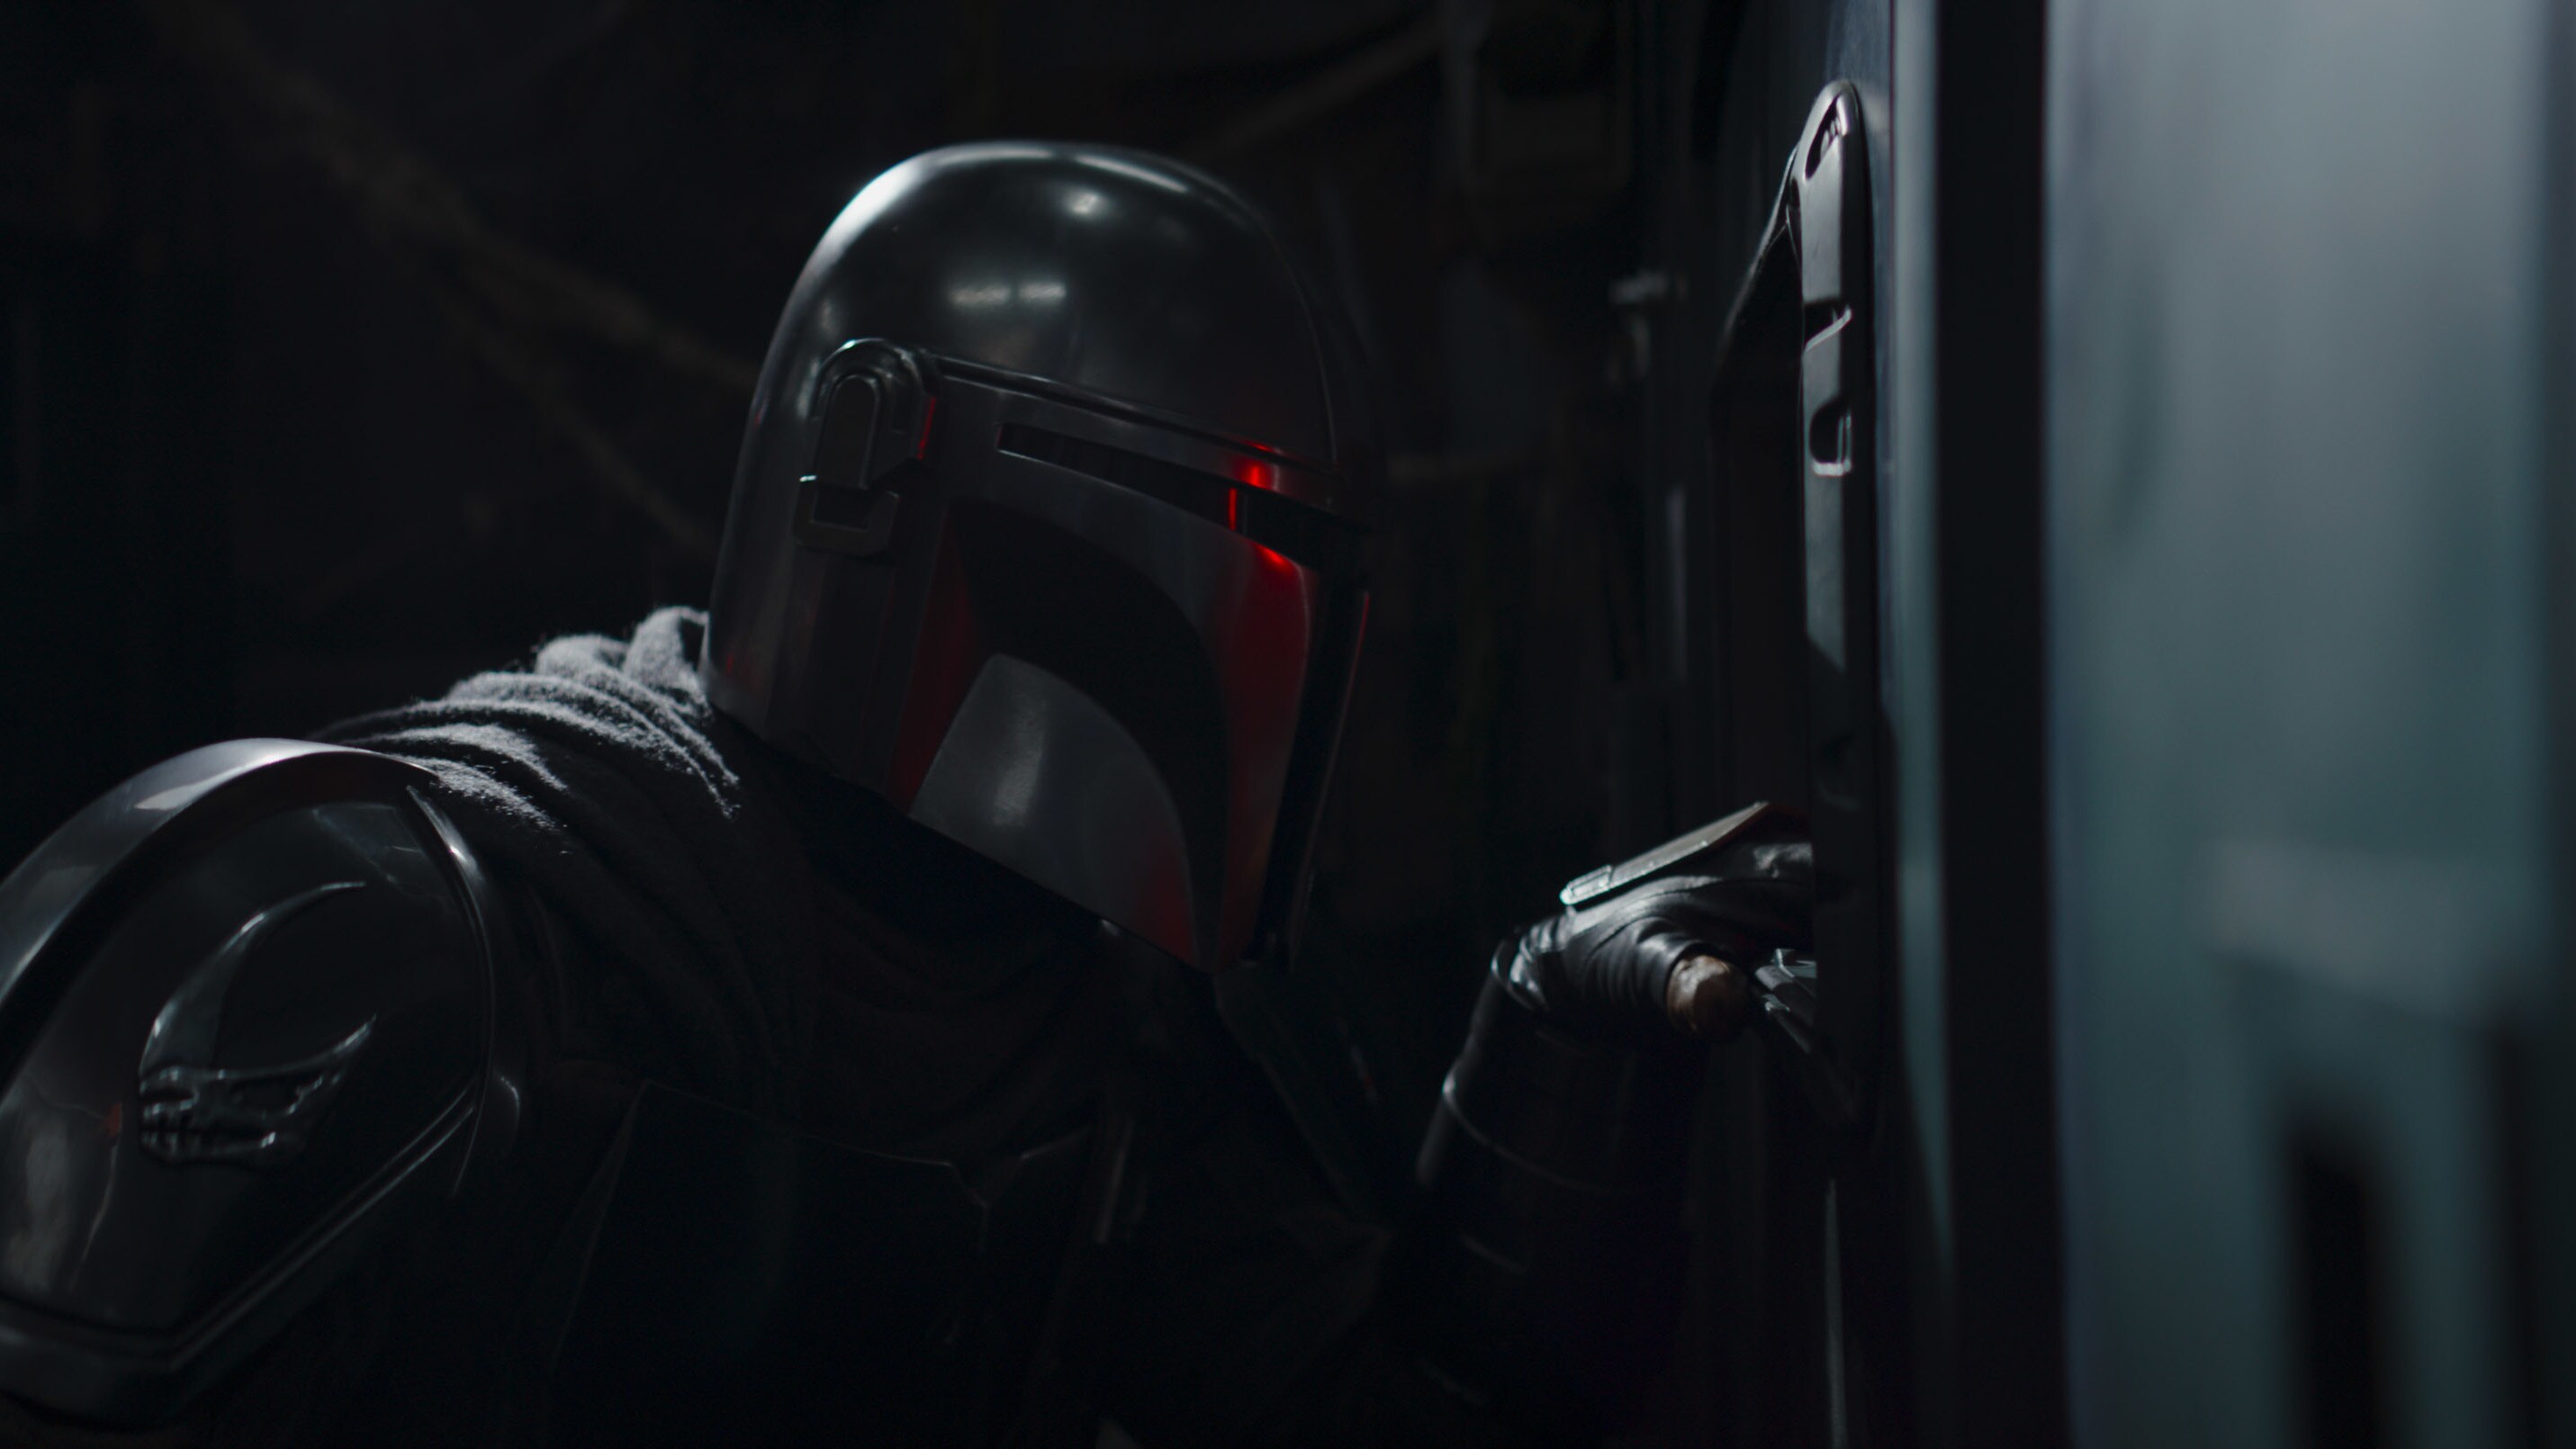 The Mandalorian (Pedro Pascal) in Lucasfilm's THE MANDALORIAN, season two, exclusively on Disney+. © 2020 Lucasfilm Ltd. & ™. All Rights Reserved.